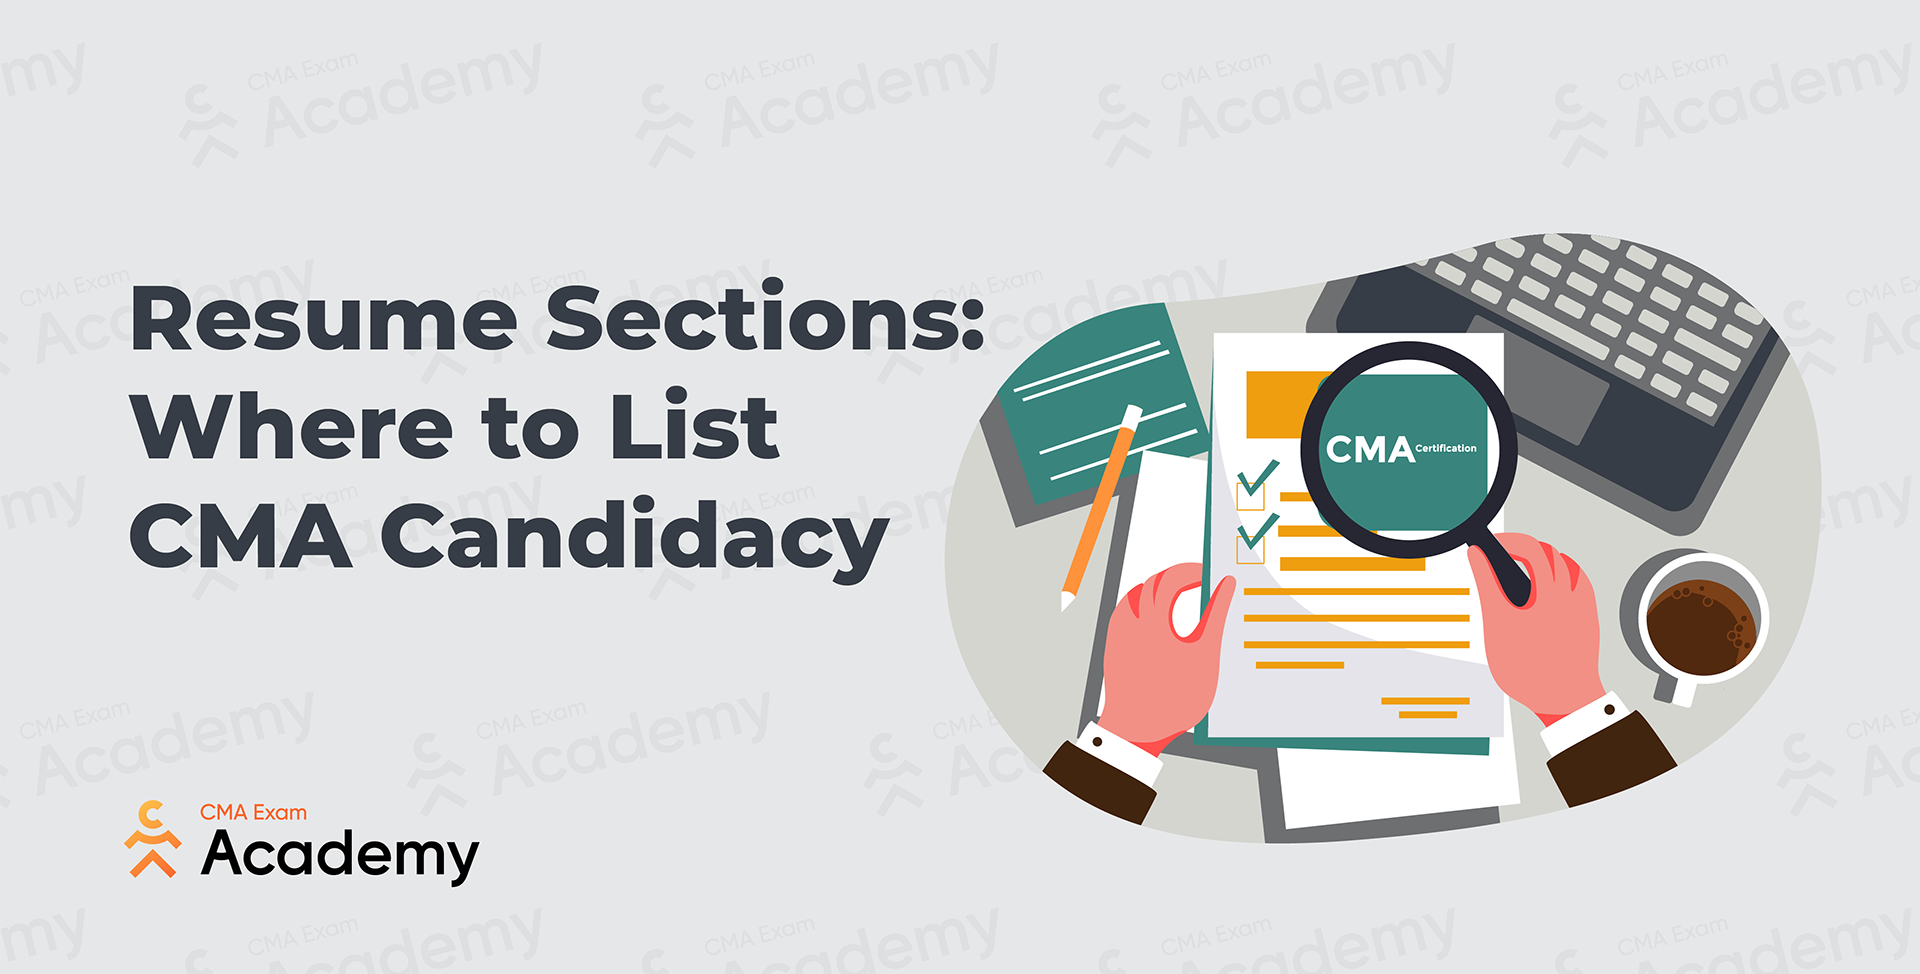 Image - Resume Sections: Where to List CMA Candidacy